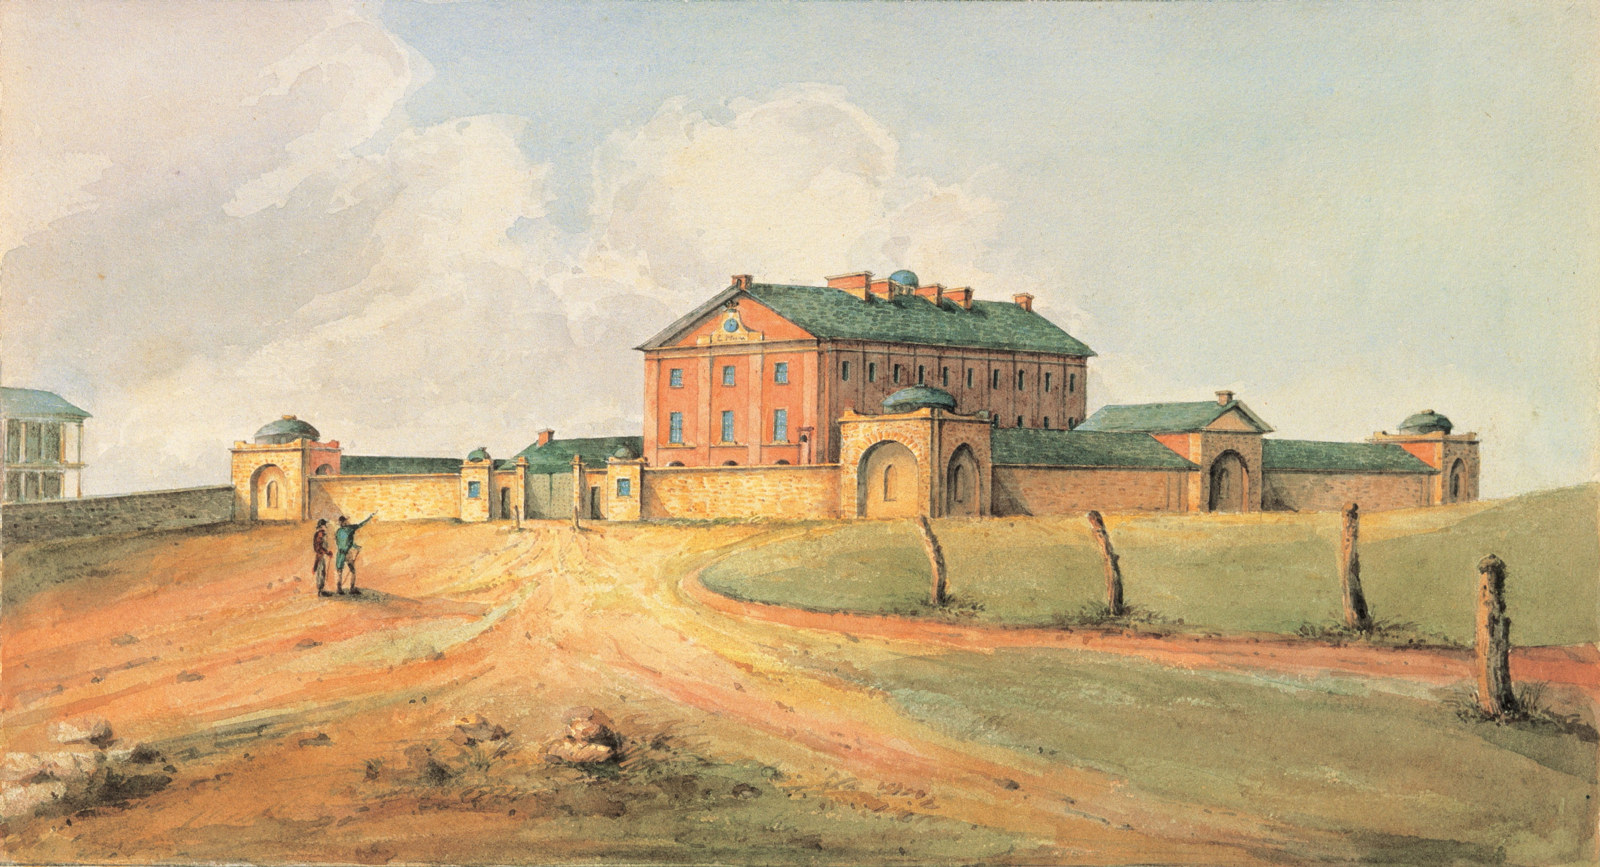 Painting of Hyde Park baracks from south western courner shortly after construction with two men in front. It looks dry and there are no trees.